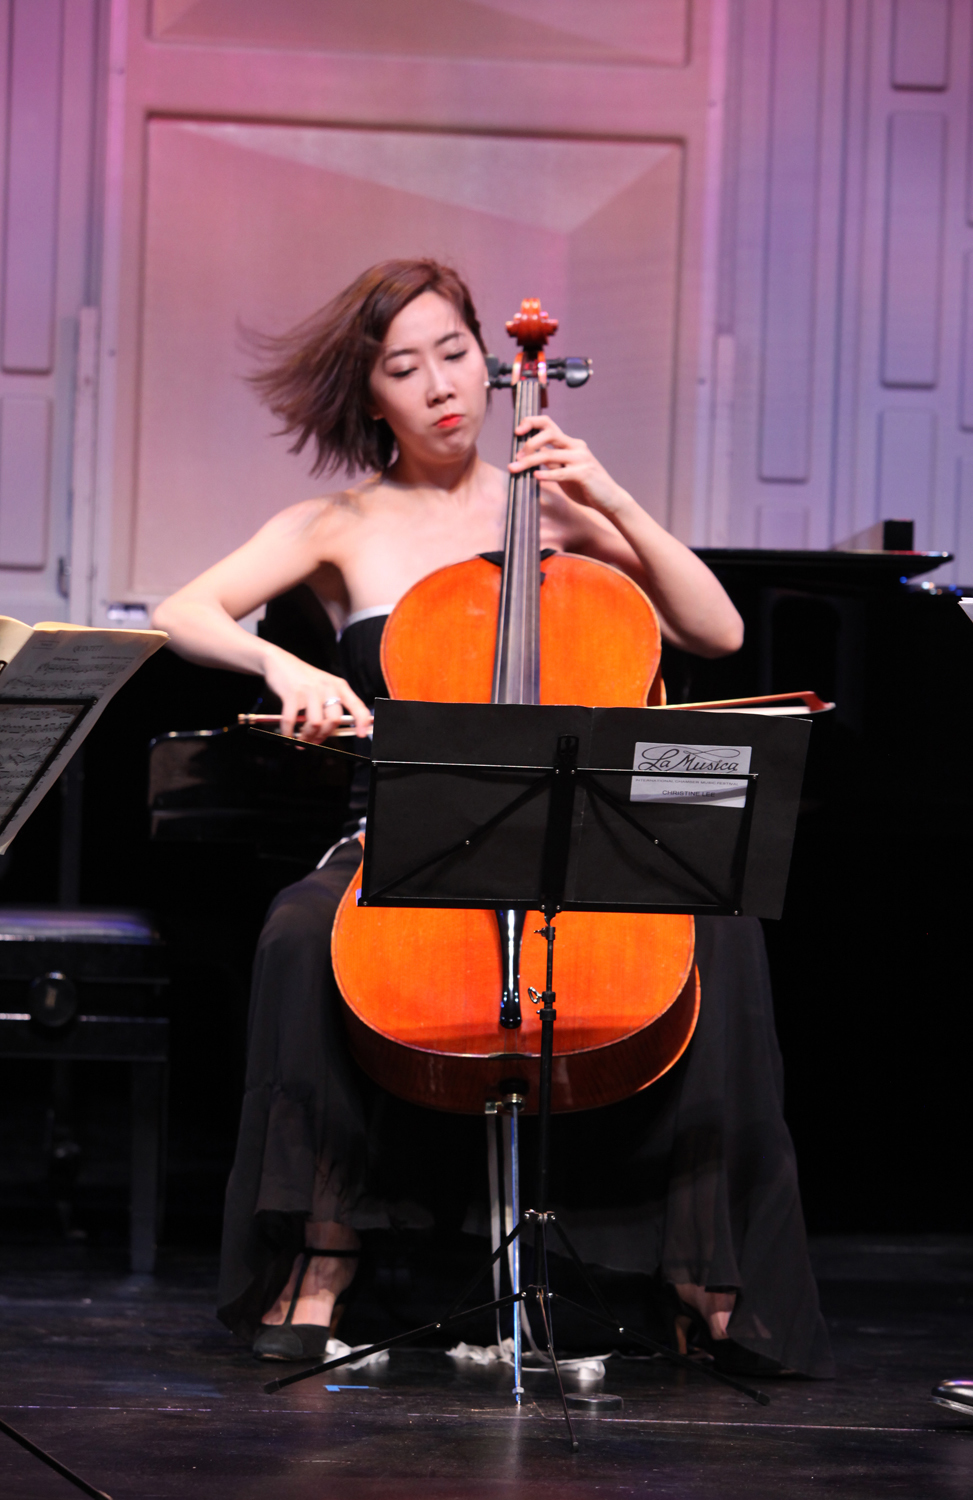 Cellist Christine J. Lee performs in all four 2019 La Musica concerts. Photo by Frank Atura